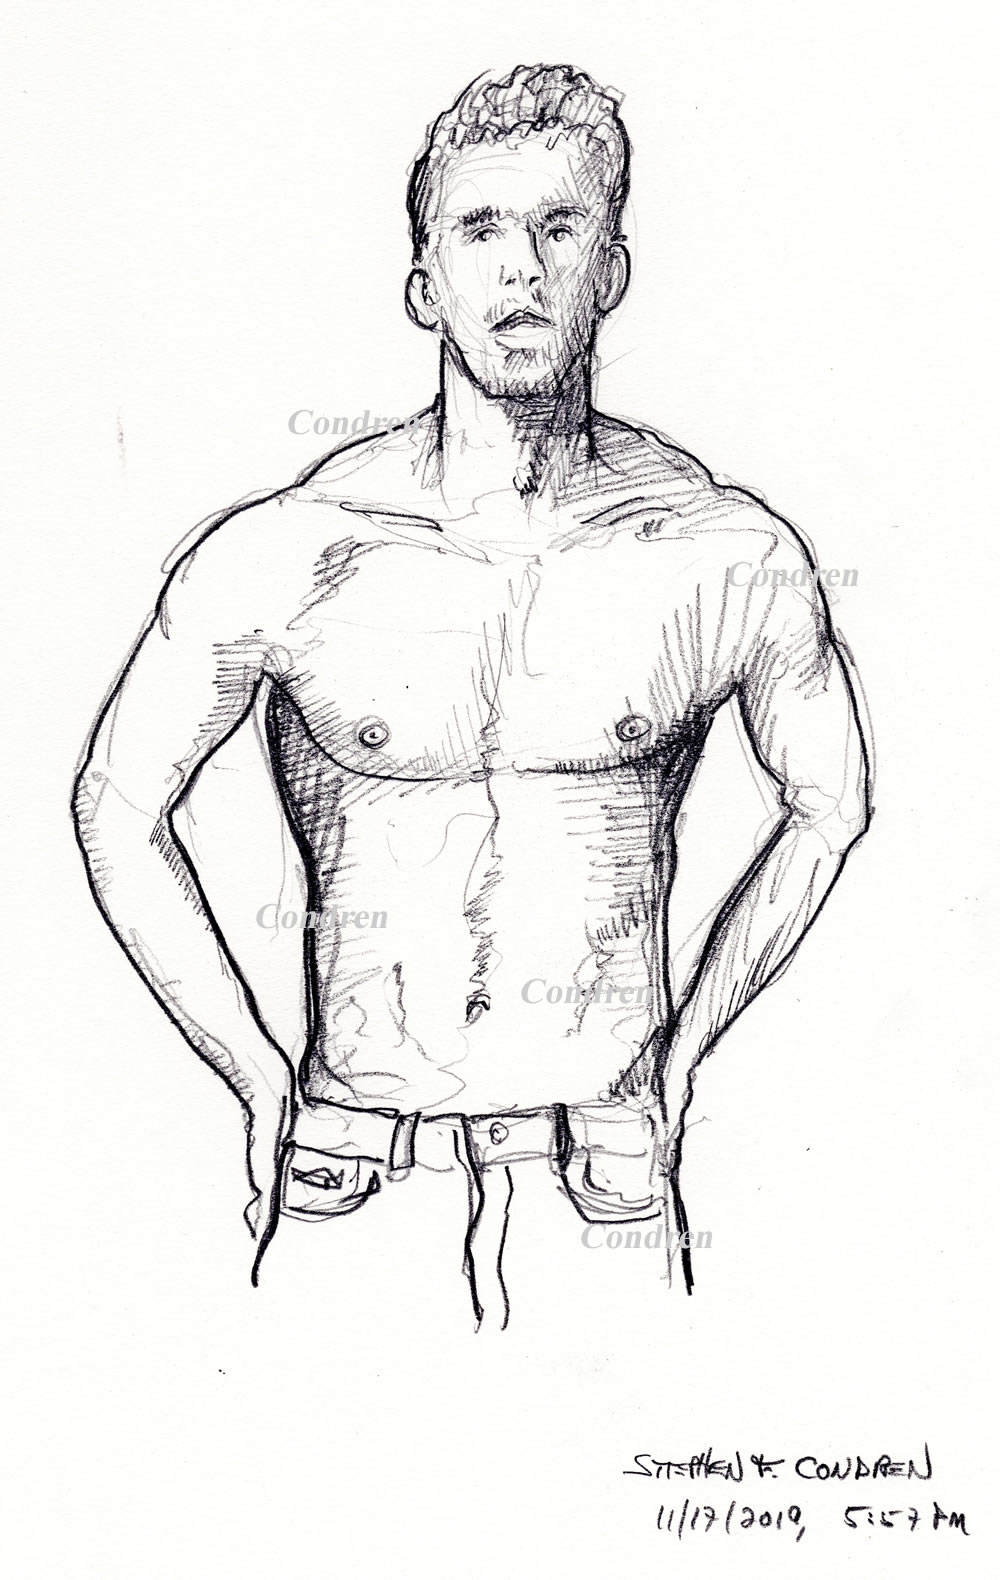 Michael Phelps #357Z or Olympic Champion pencil figure drawing by artist Stephen F. Condren, with LGBTQ endorsed gay prints.